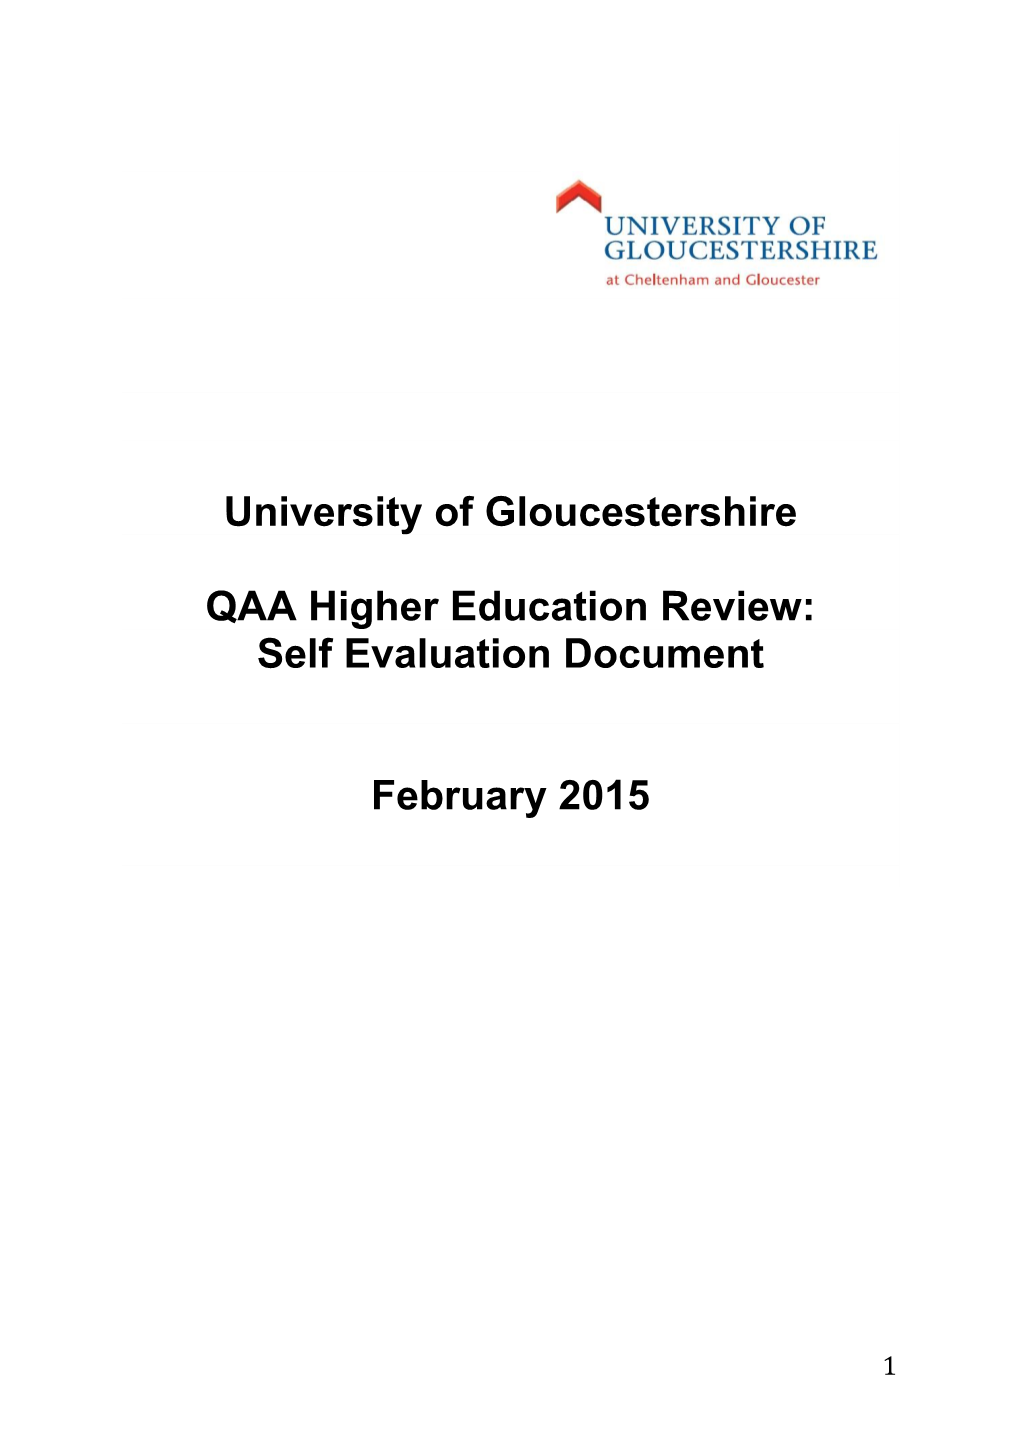 University of Gloucestershire QAA Higher Education Review